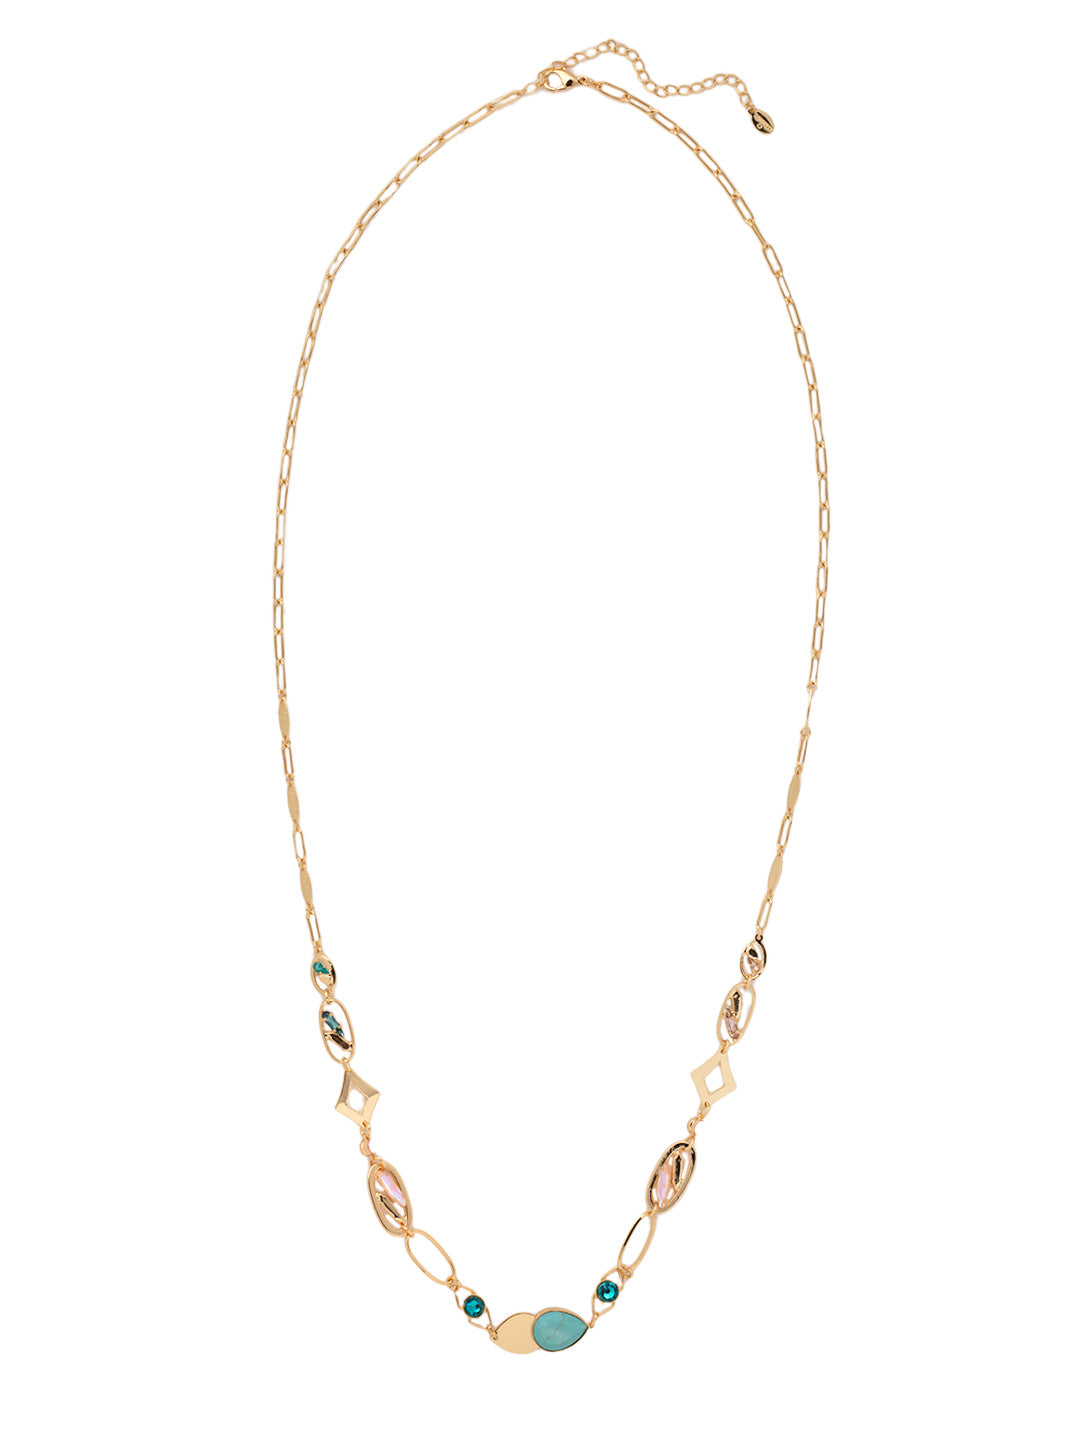 Moira Long Necklace - NEZ4BGSOP - <p>The Moira Long Necklace is a masterpiece of assorted chain links and crystals; crafted to stand out and make a statement. From Sorrelli's South Pacific collection in our Bright Gold-tone finish.</p>